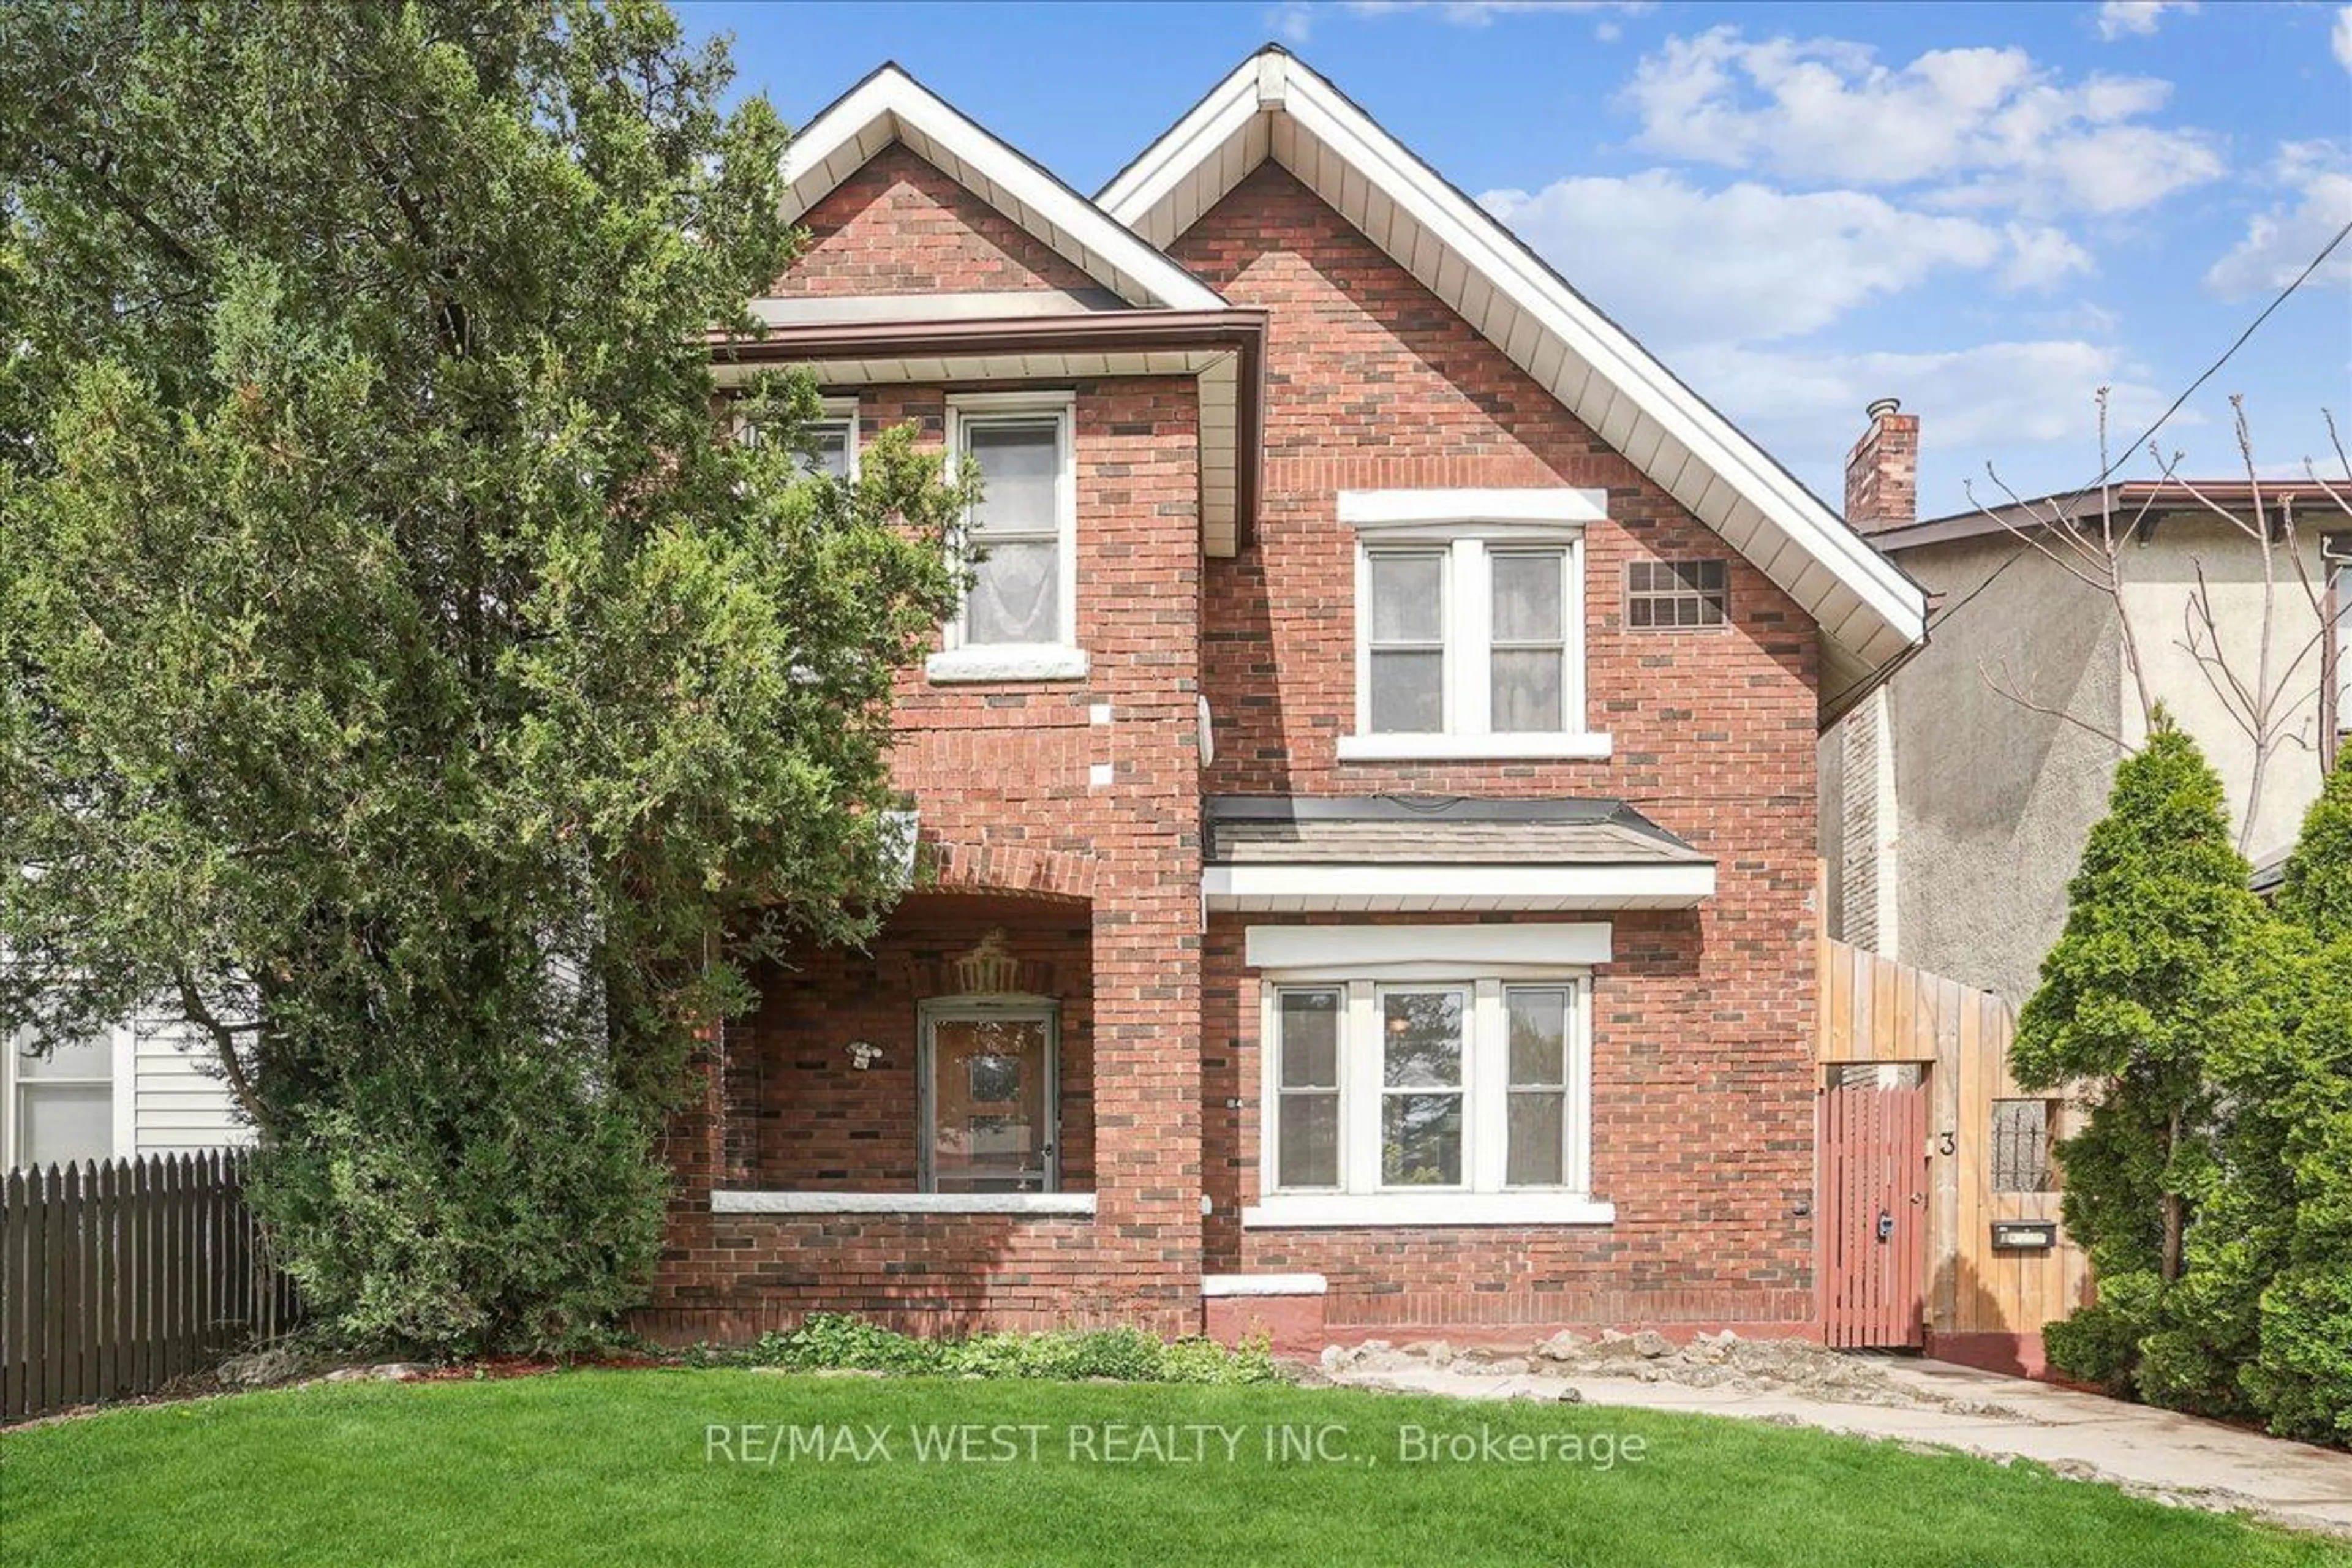 Home with brick exterior material for 84 West Ave, Hamilton Ontario L8N 2S3